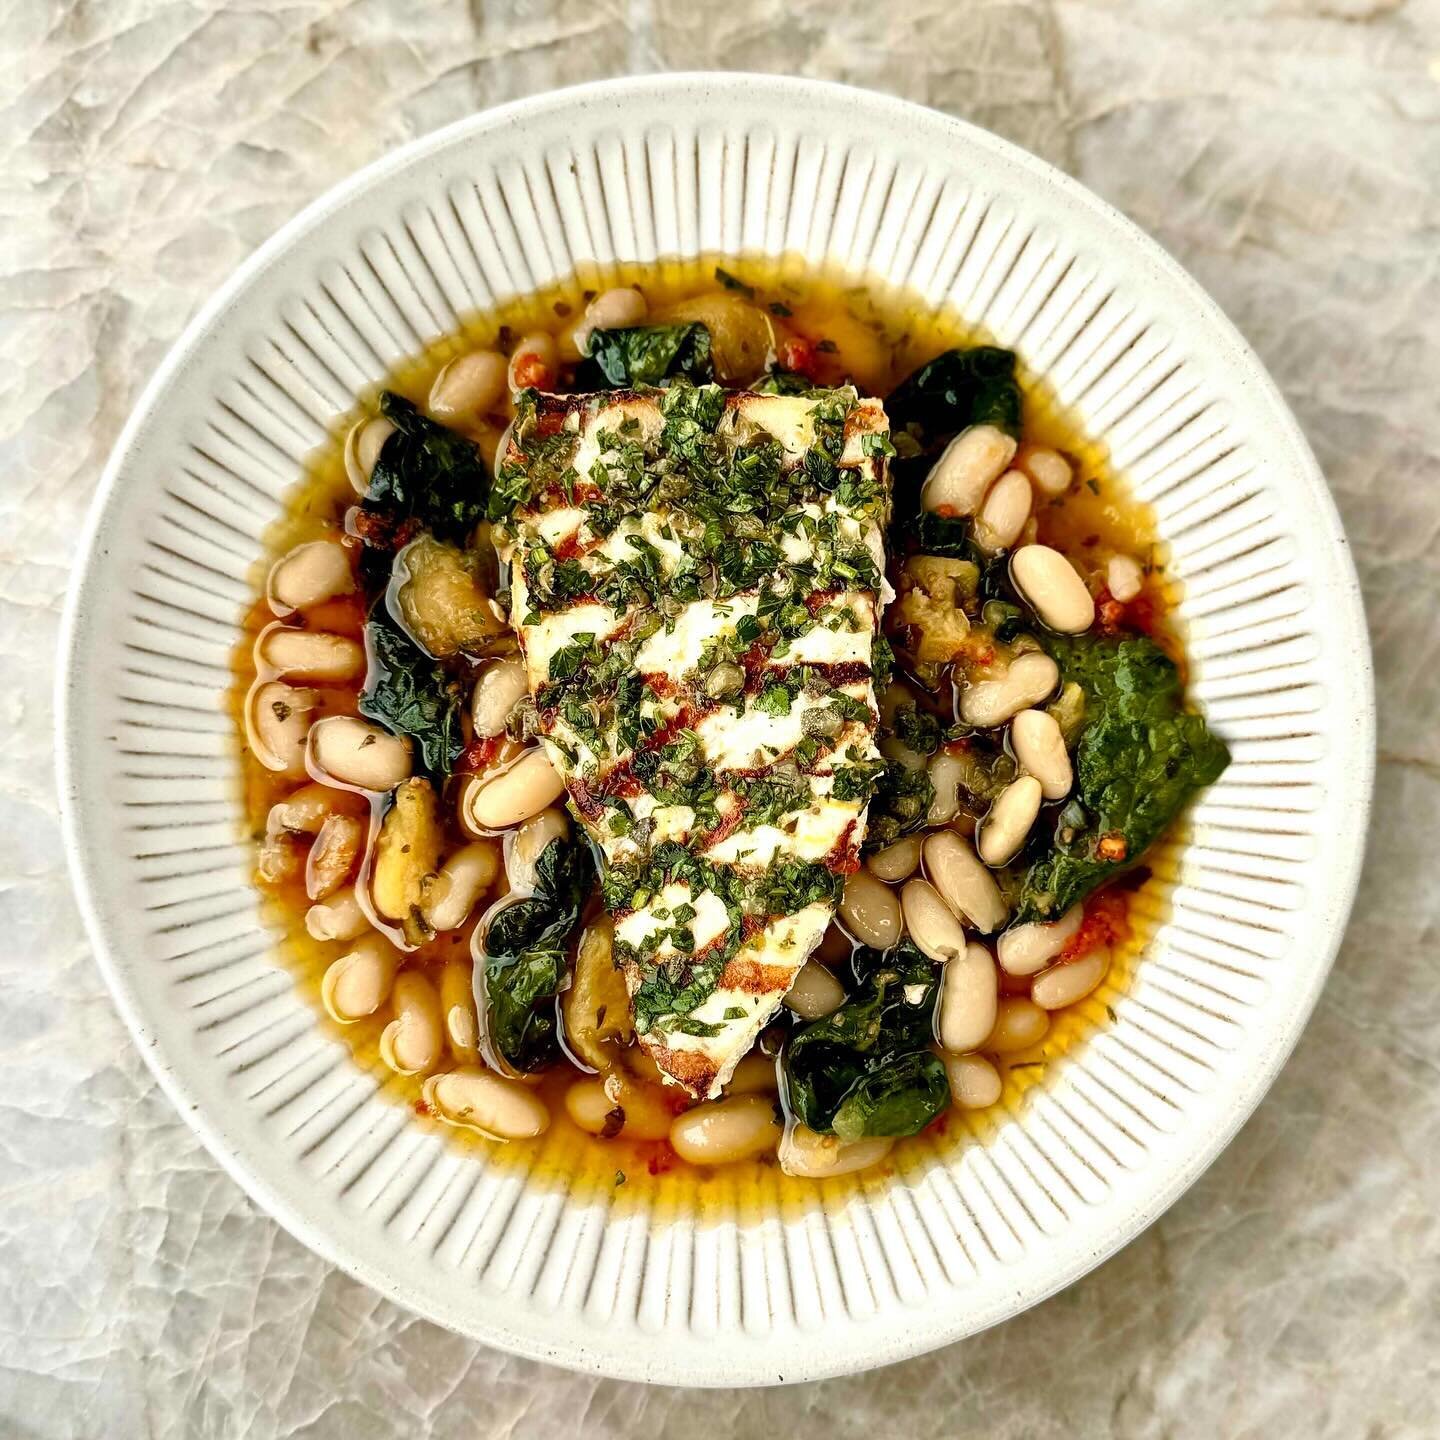 New(ish) fish on our menu: Pesce Spada 🐟🐟🐟 ~ grilled swordfish steak served on braised cannellini beans with Tuscan kale, tomatoes and herb gremolata. Perfect for this lovely warm weather!
.
.
.
.
.
#ViaTriozzi #DallasEats #seafood #ItalianSeafood